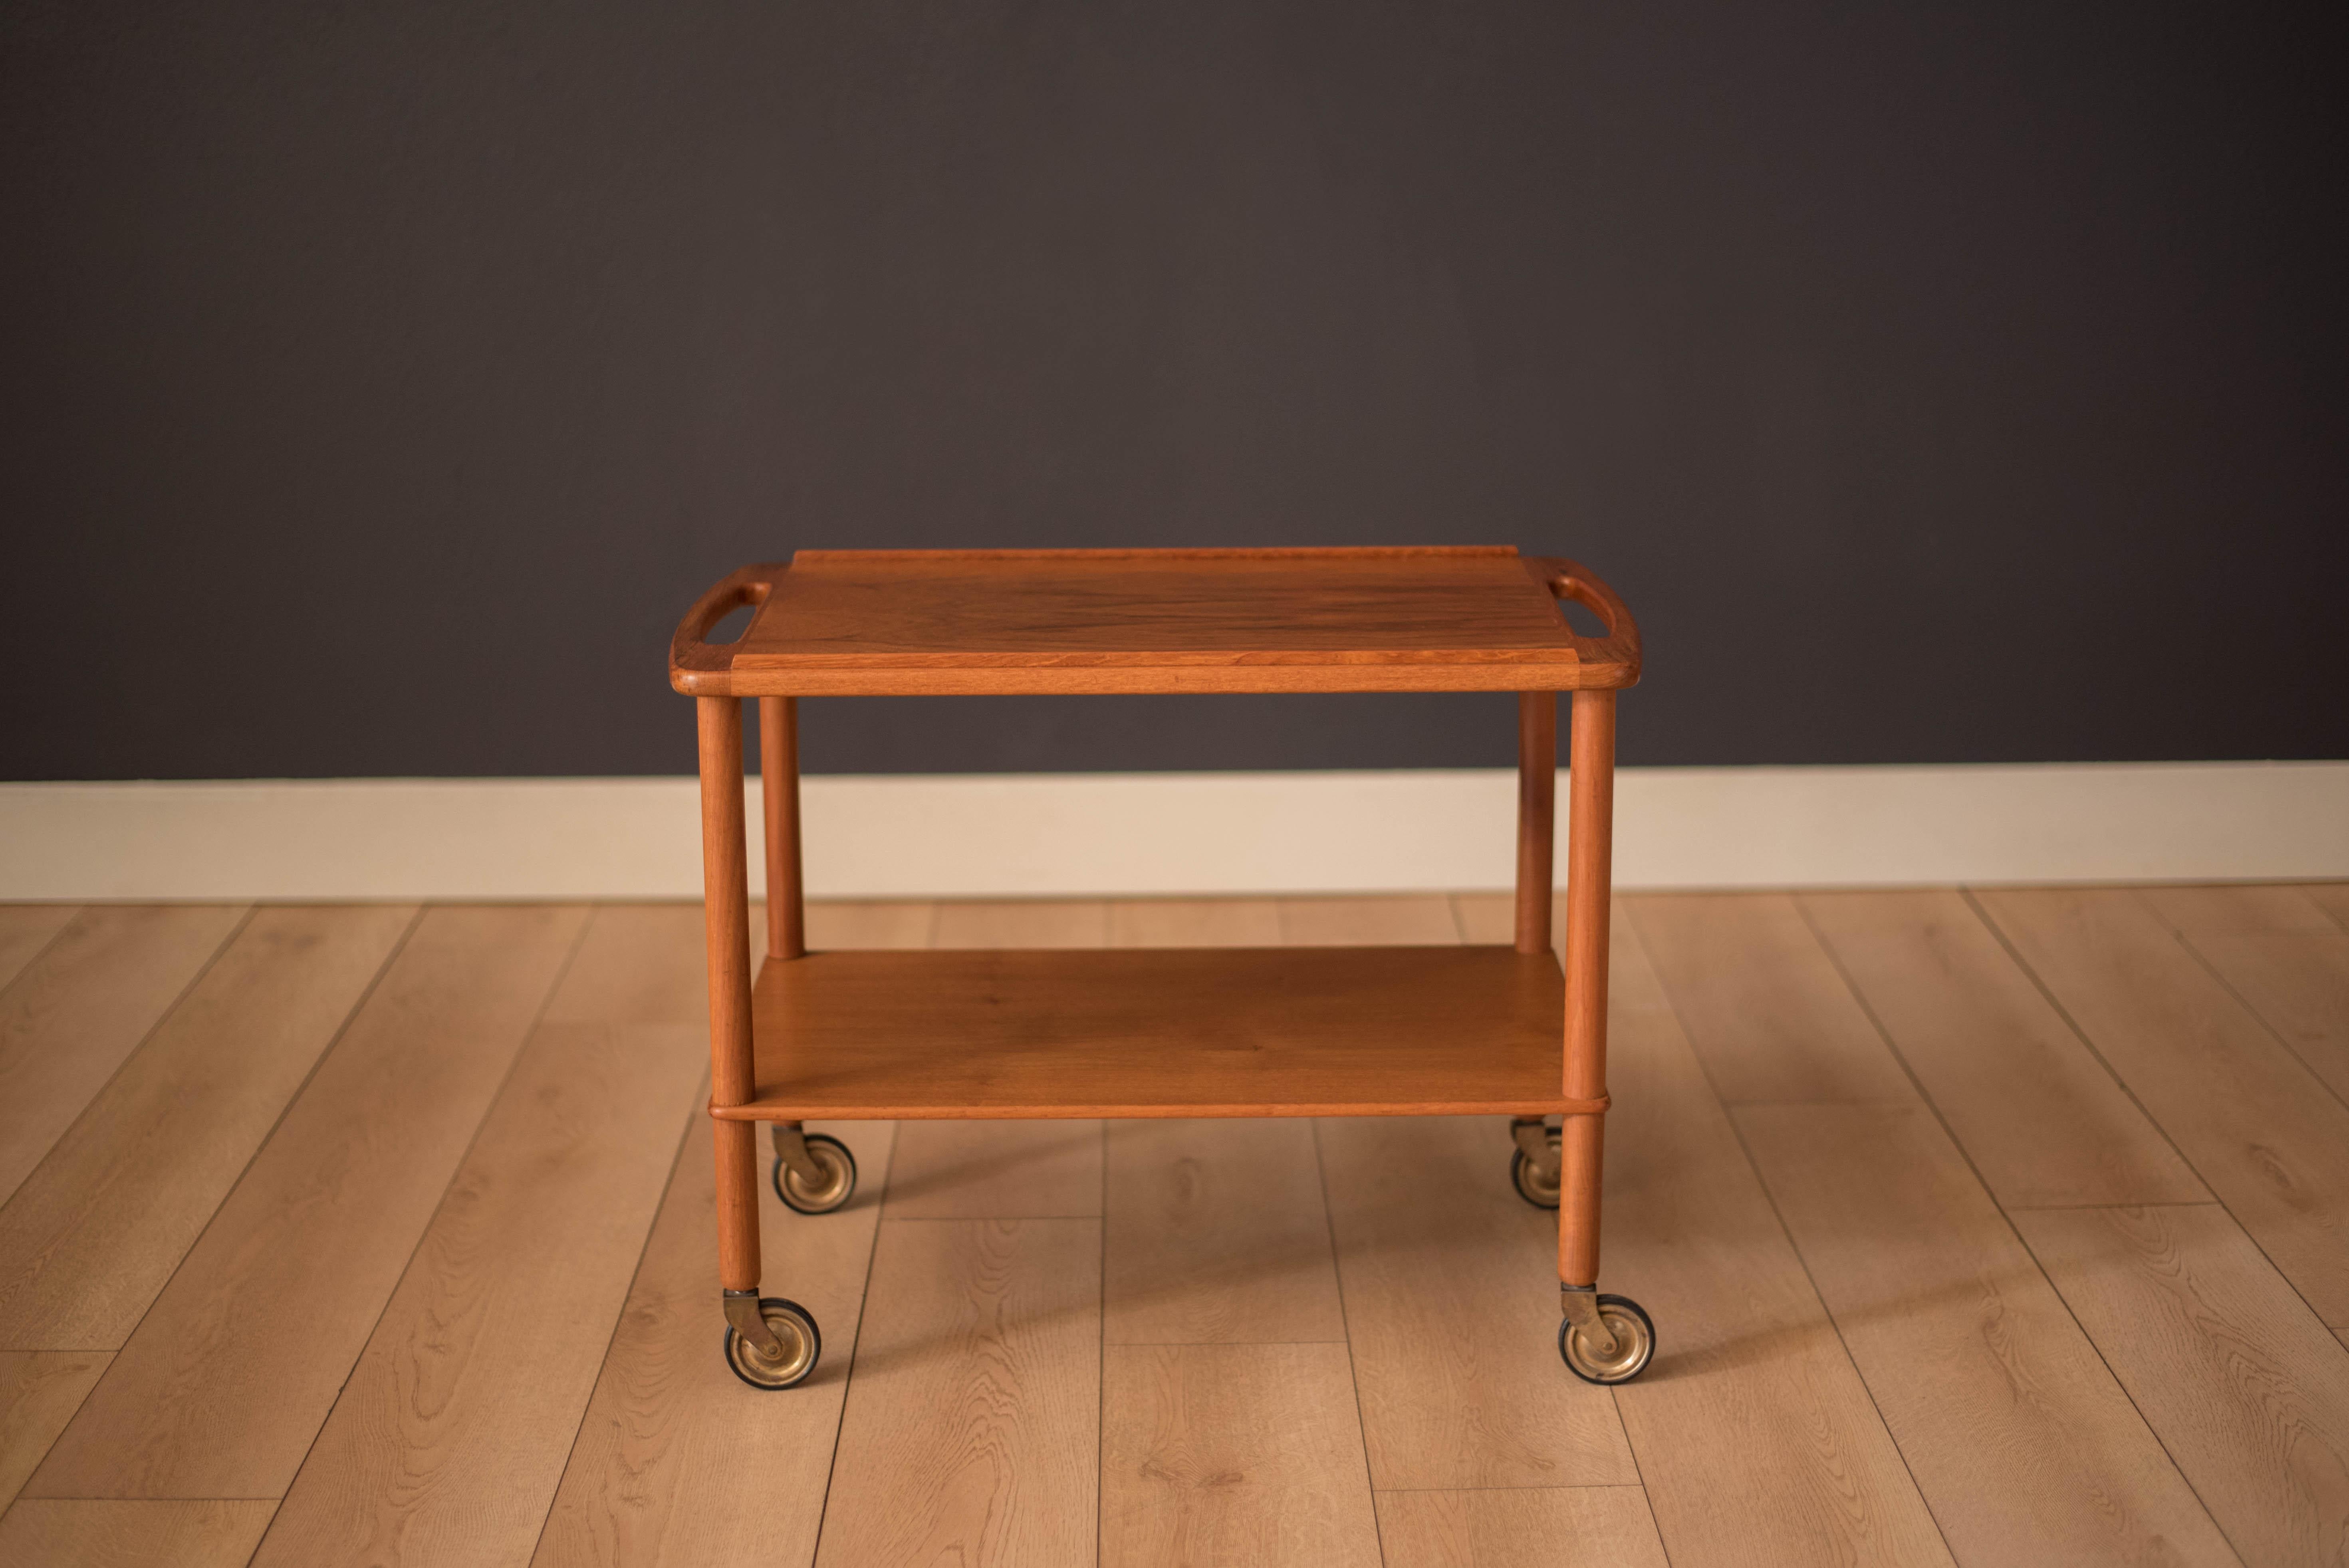 Mid-Century Modern teak serving tea trolley or bar cart made by Bowa, Denmark, circa 1960s. This piece features two sculpted handles on each side and easy to roll original casters. Equipped with a lower tier shelf for extra display storage.